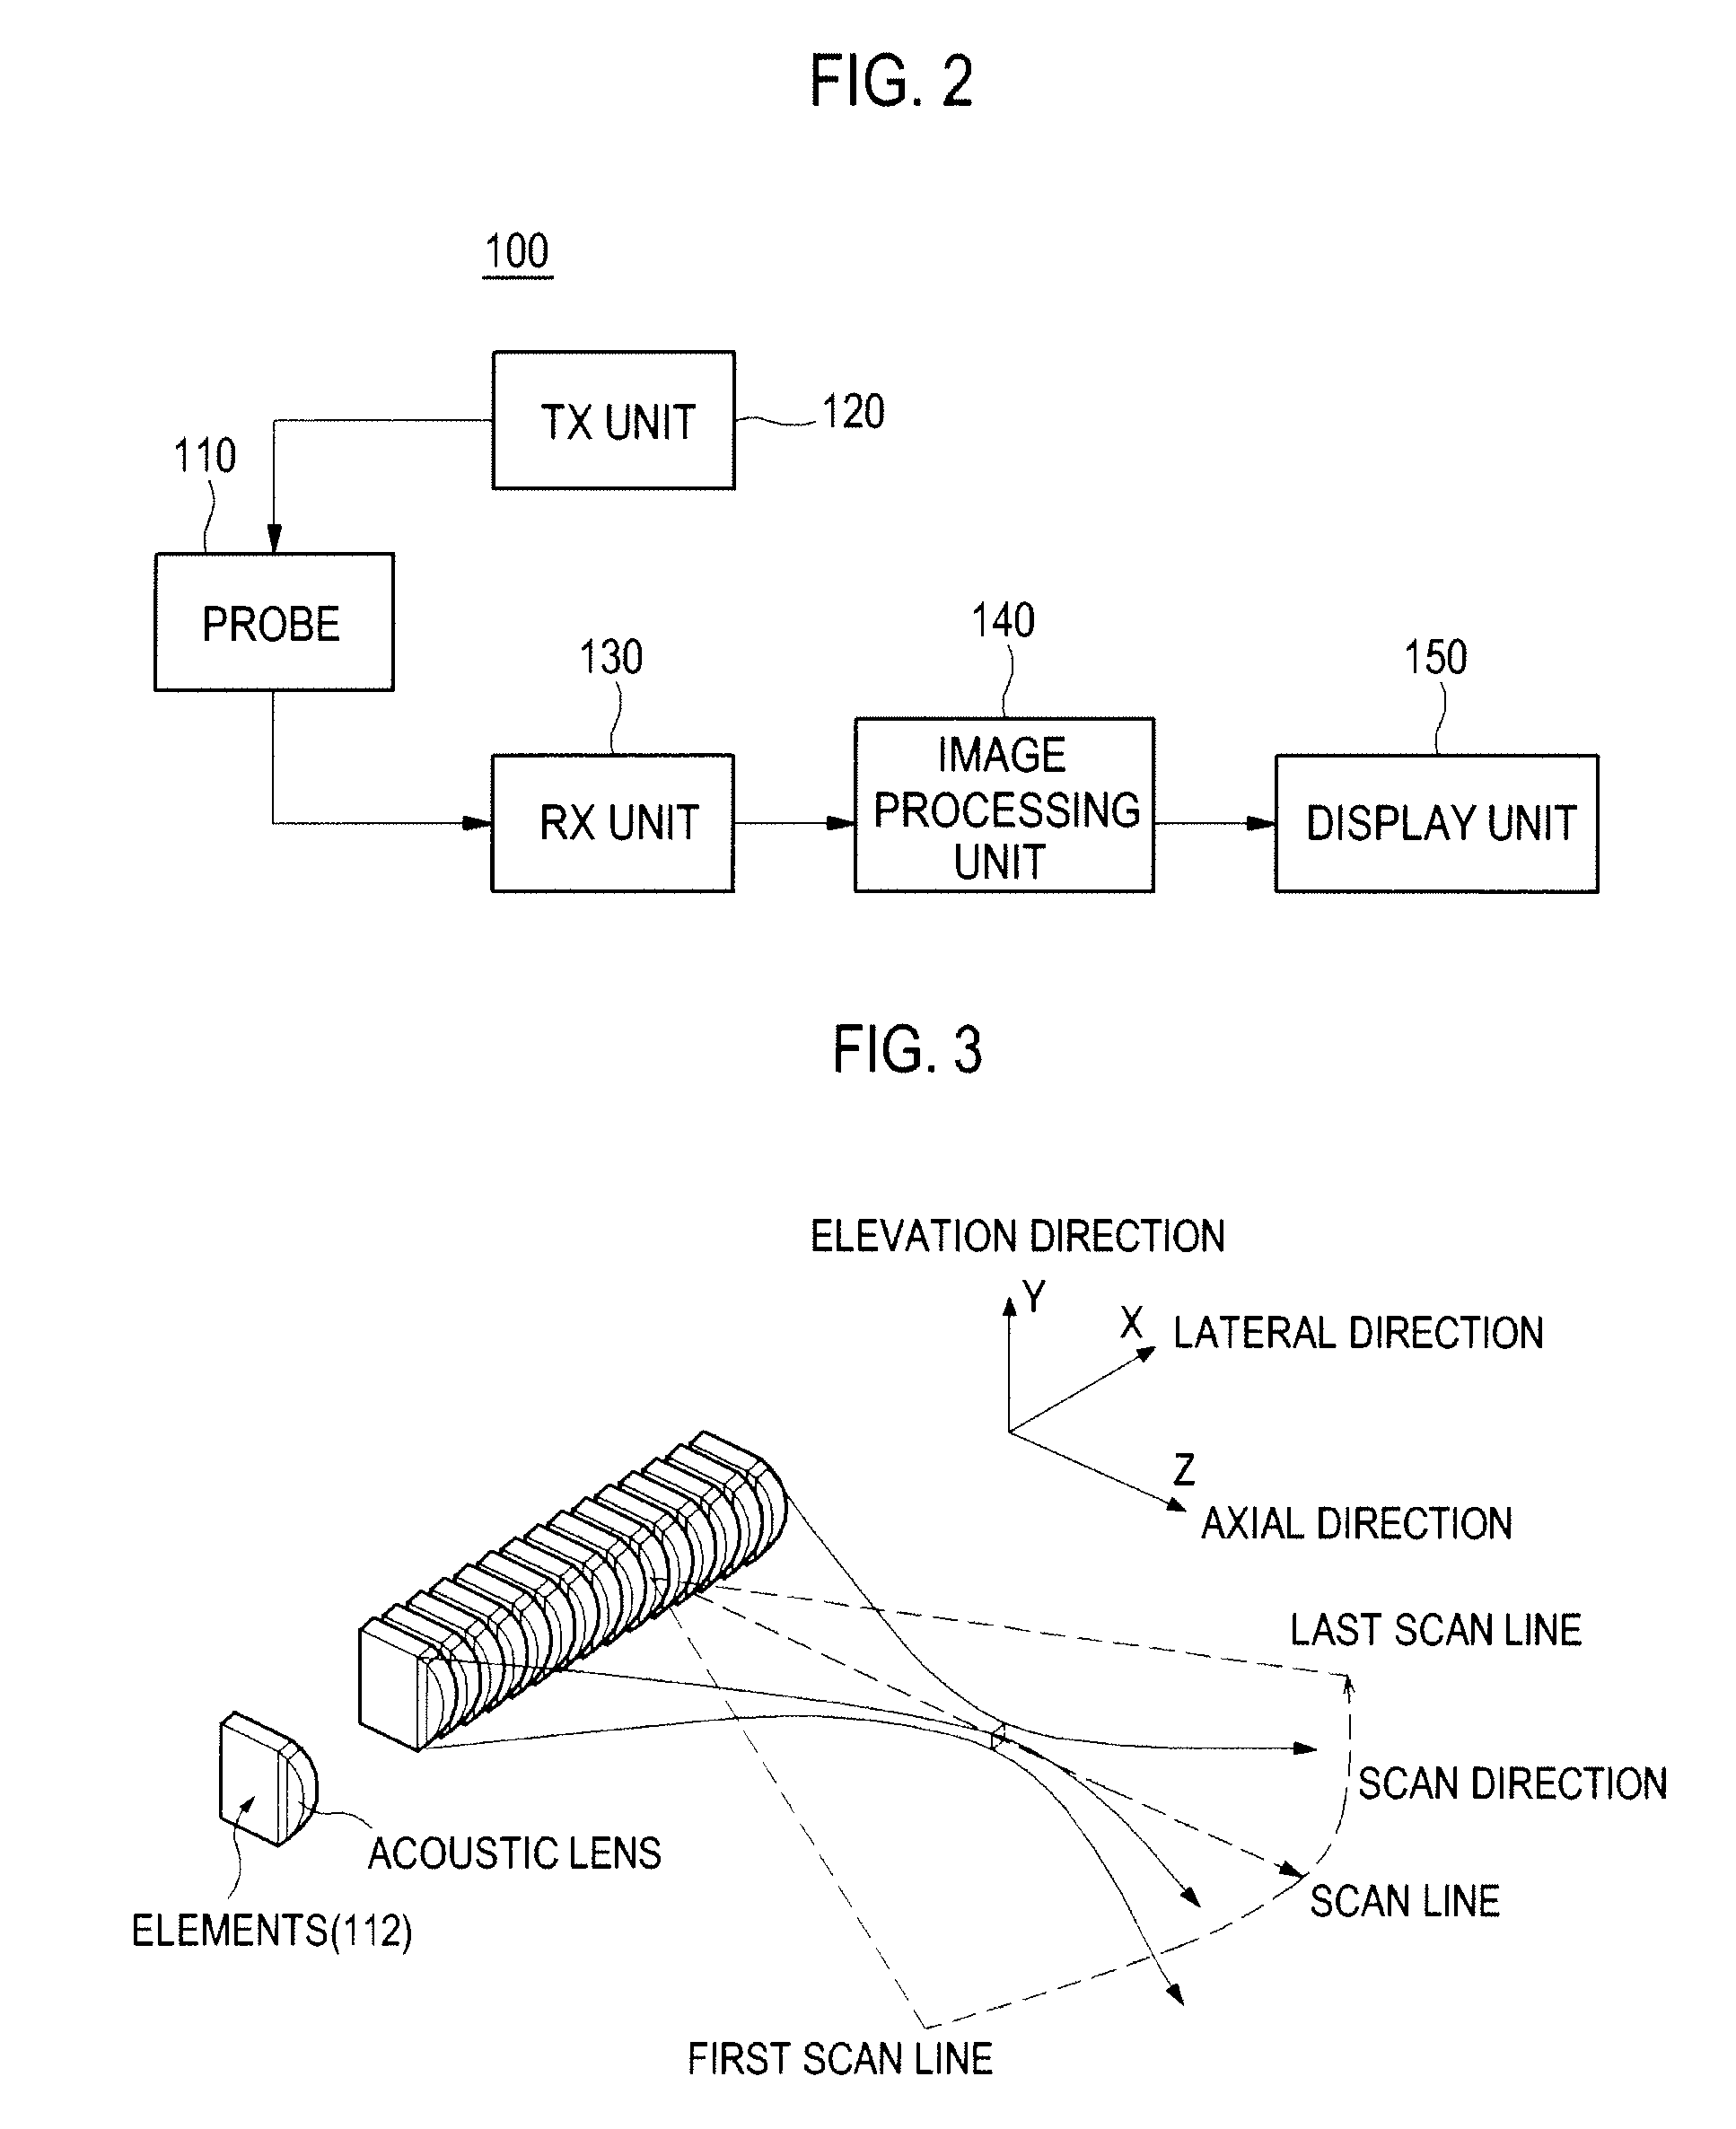 Transmit Apodization Using A Sinc Function In An Ultrasound System